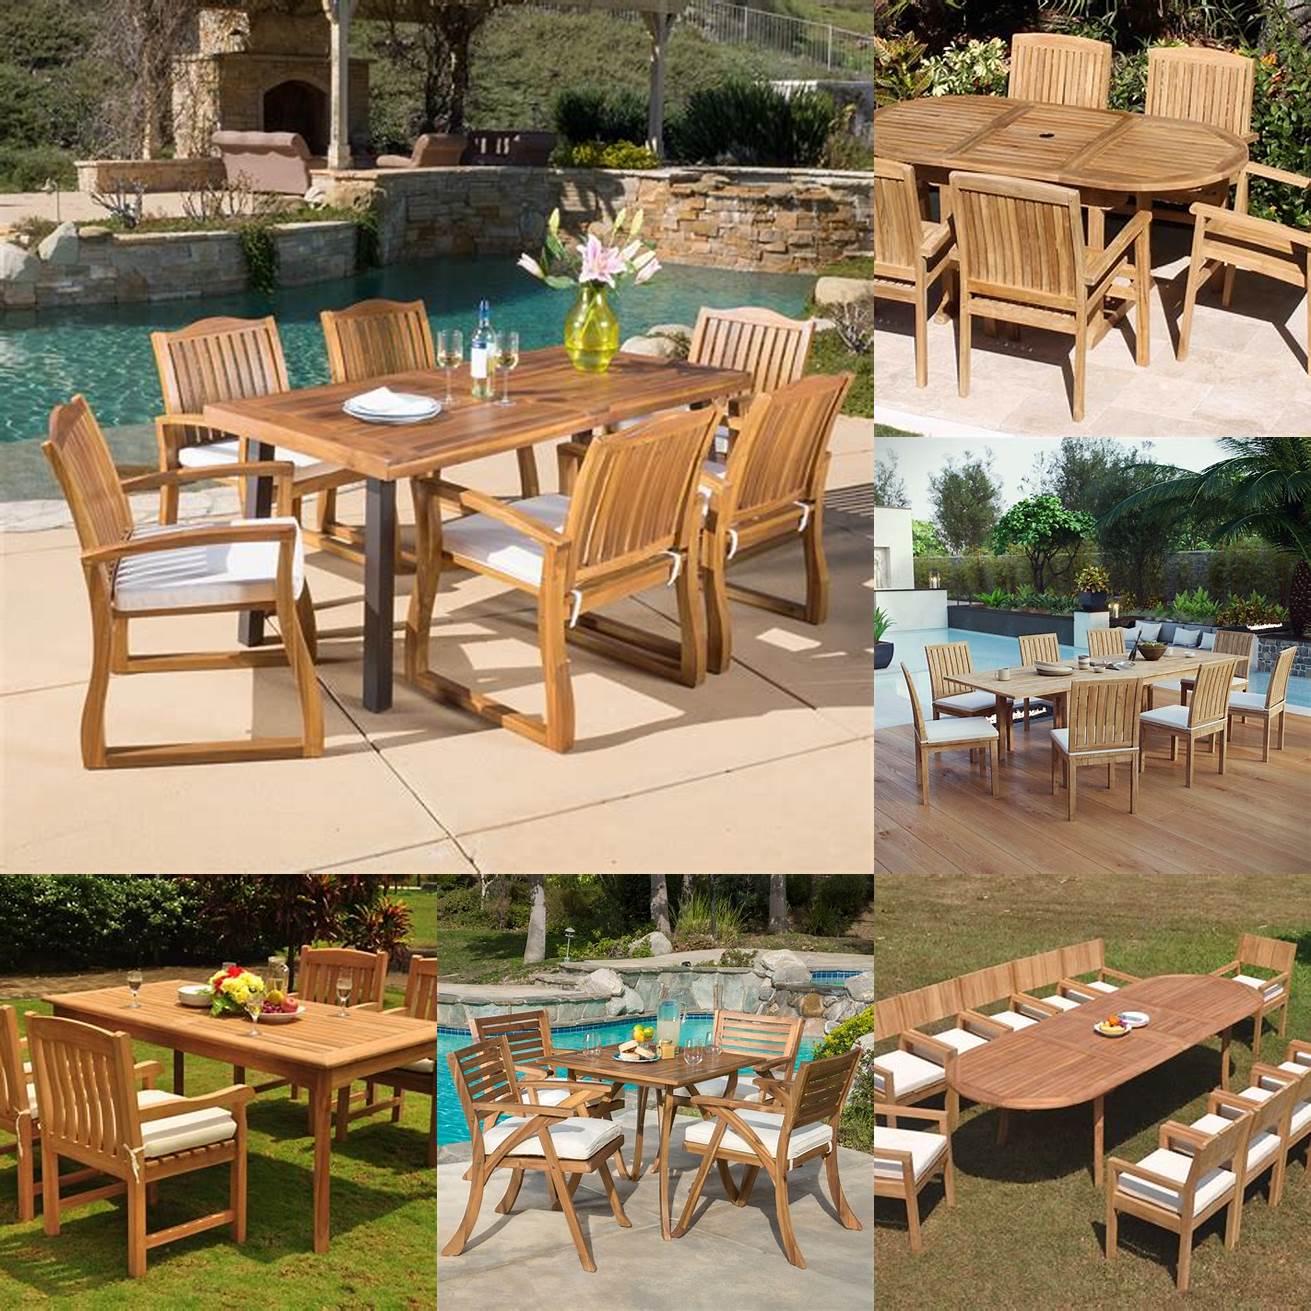 Teak Outdoor Furniture in a Variety of Settings